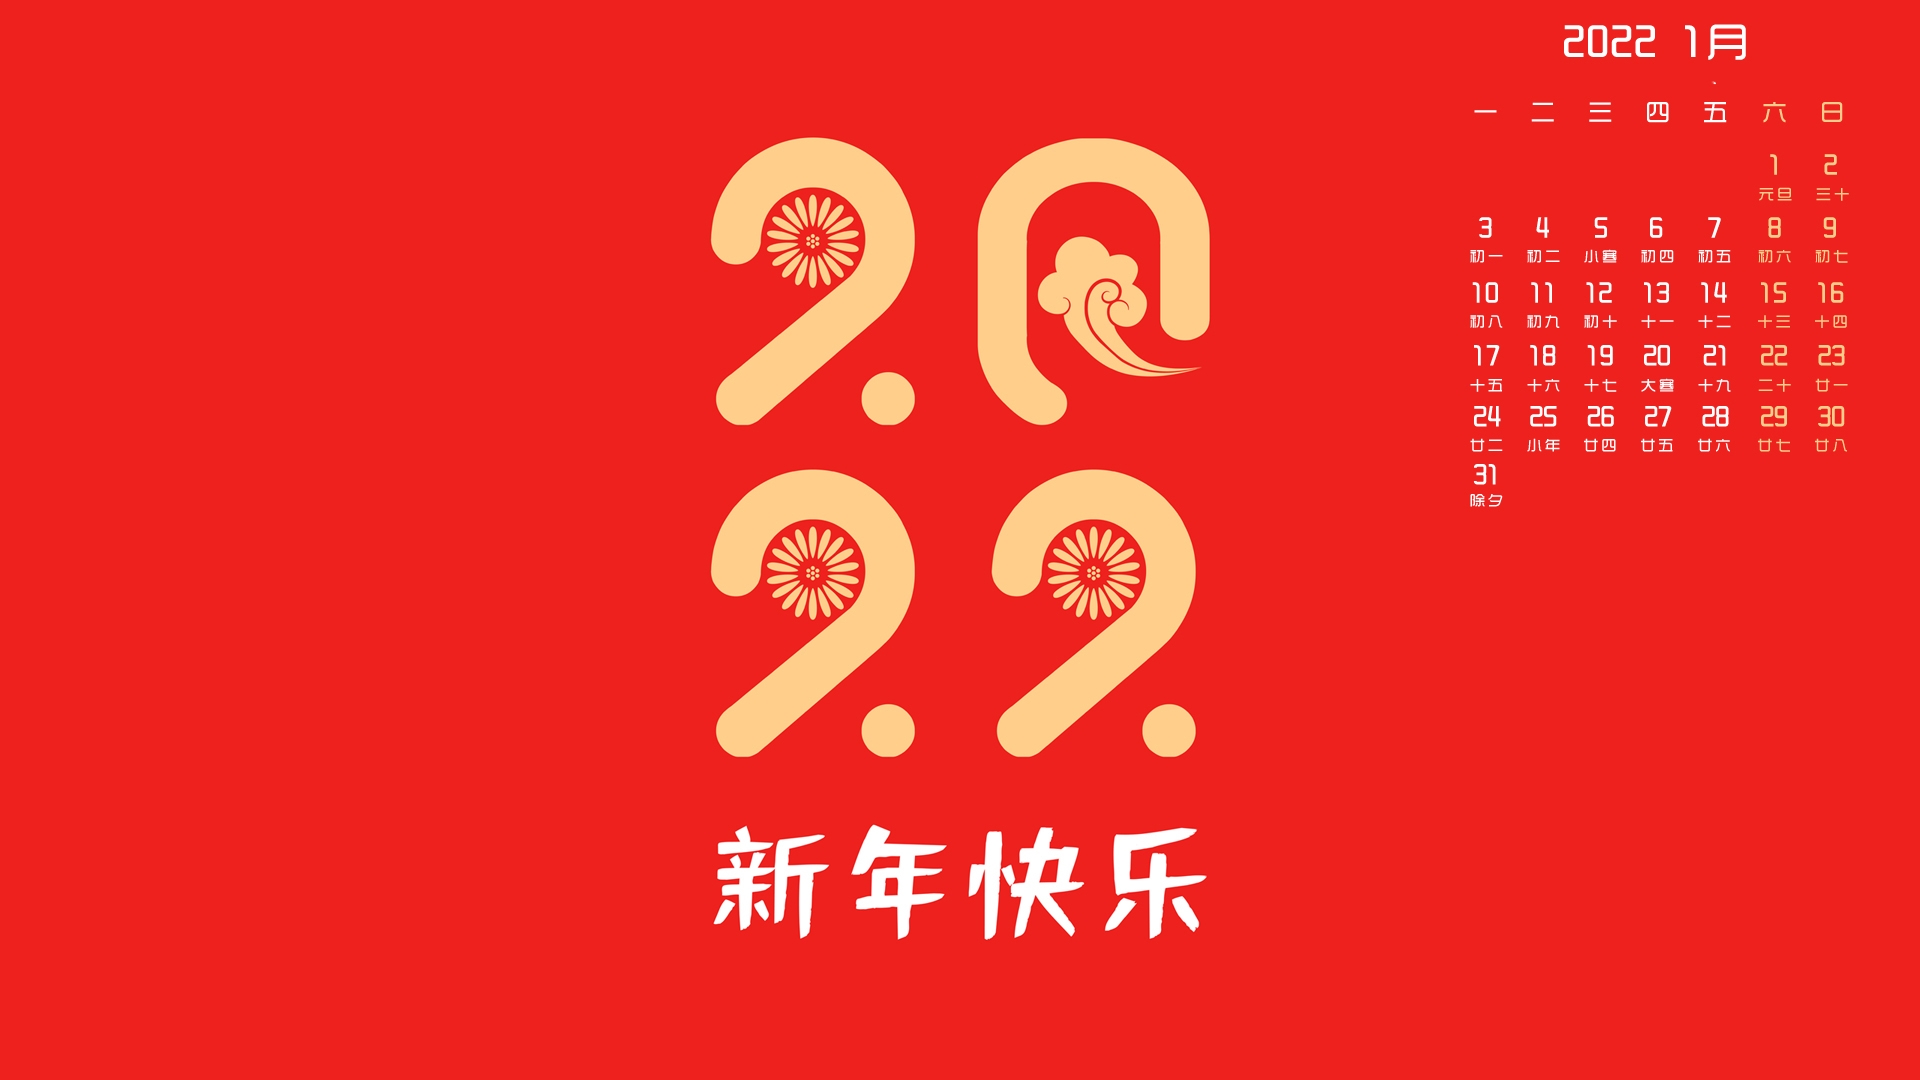 <span style='color:red;'>2022年1月</span>元旦日历壁纸